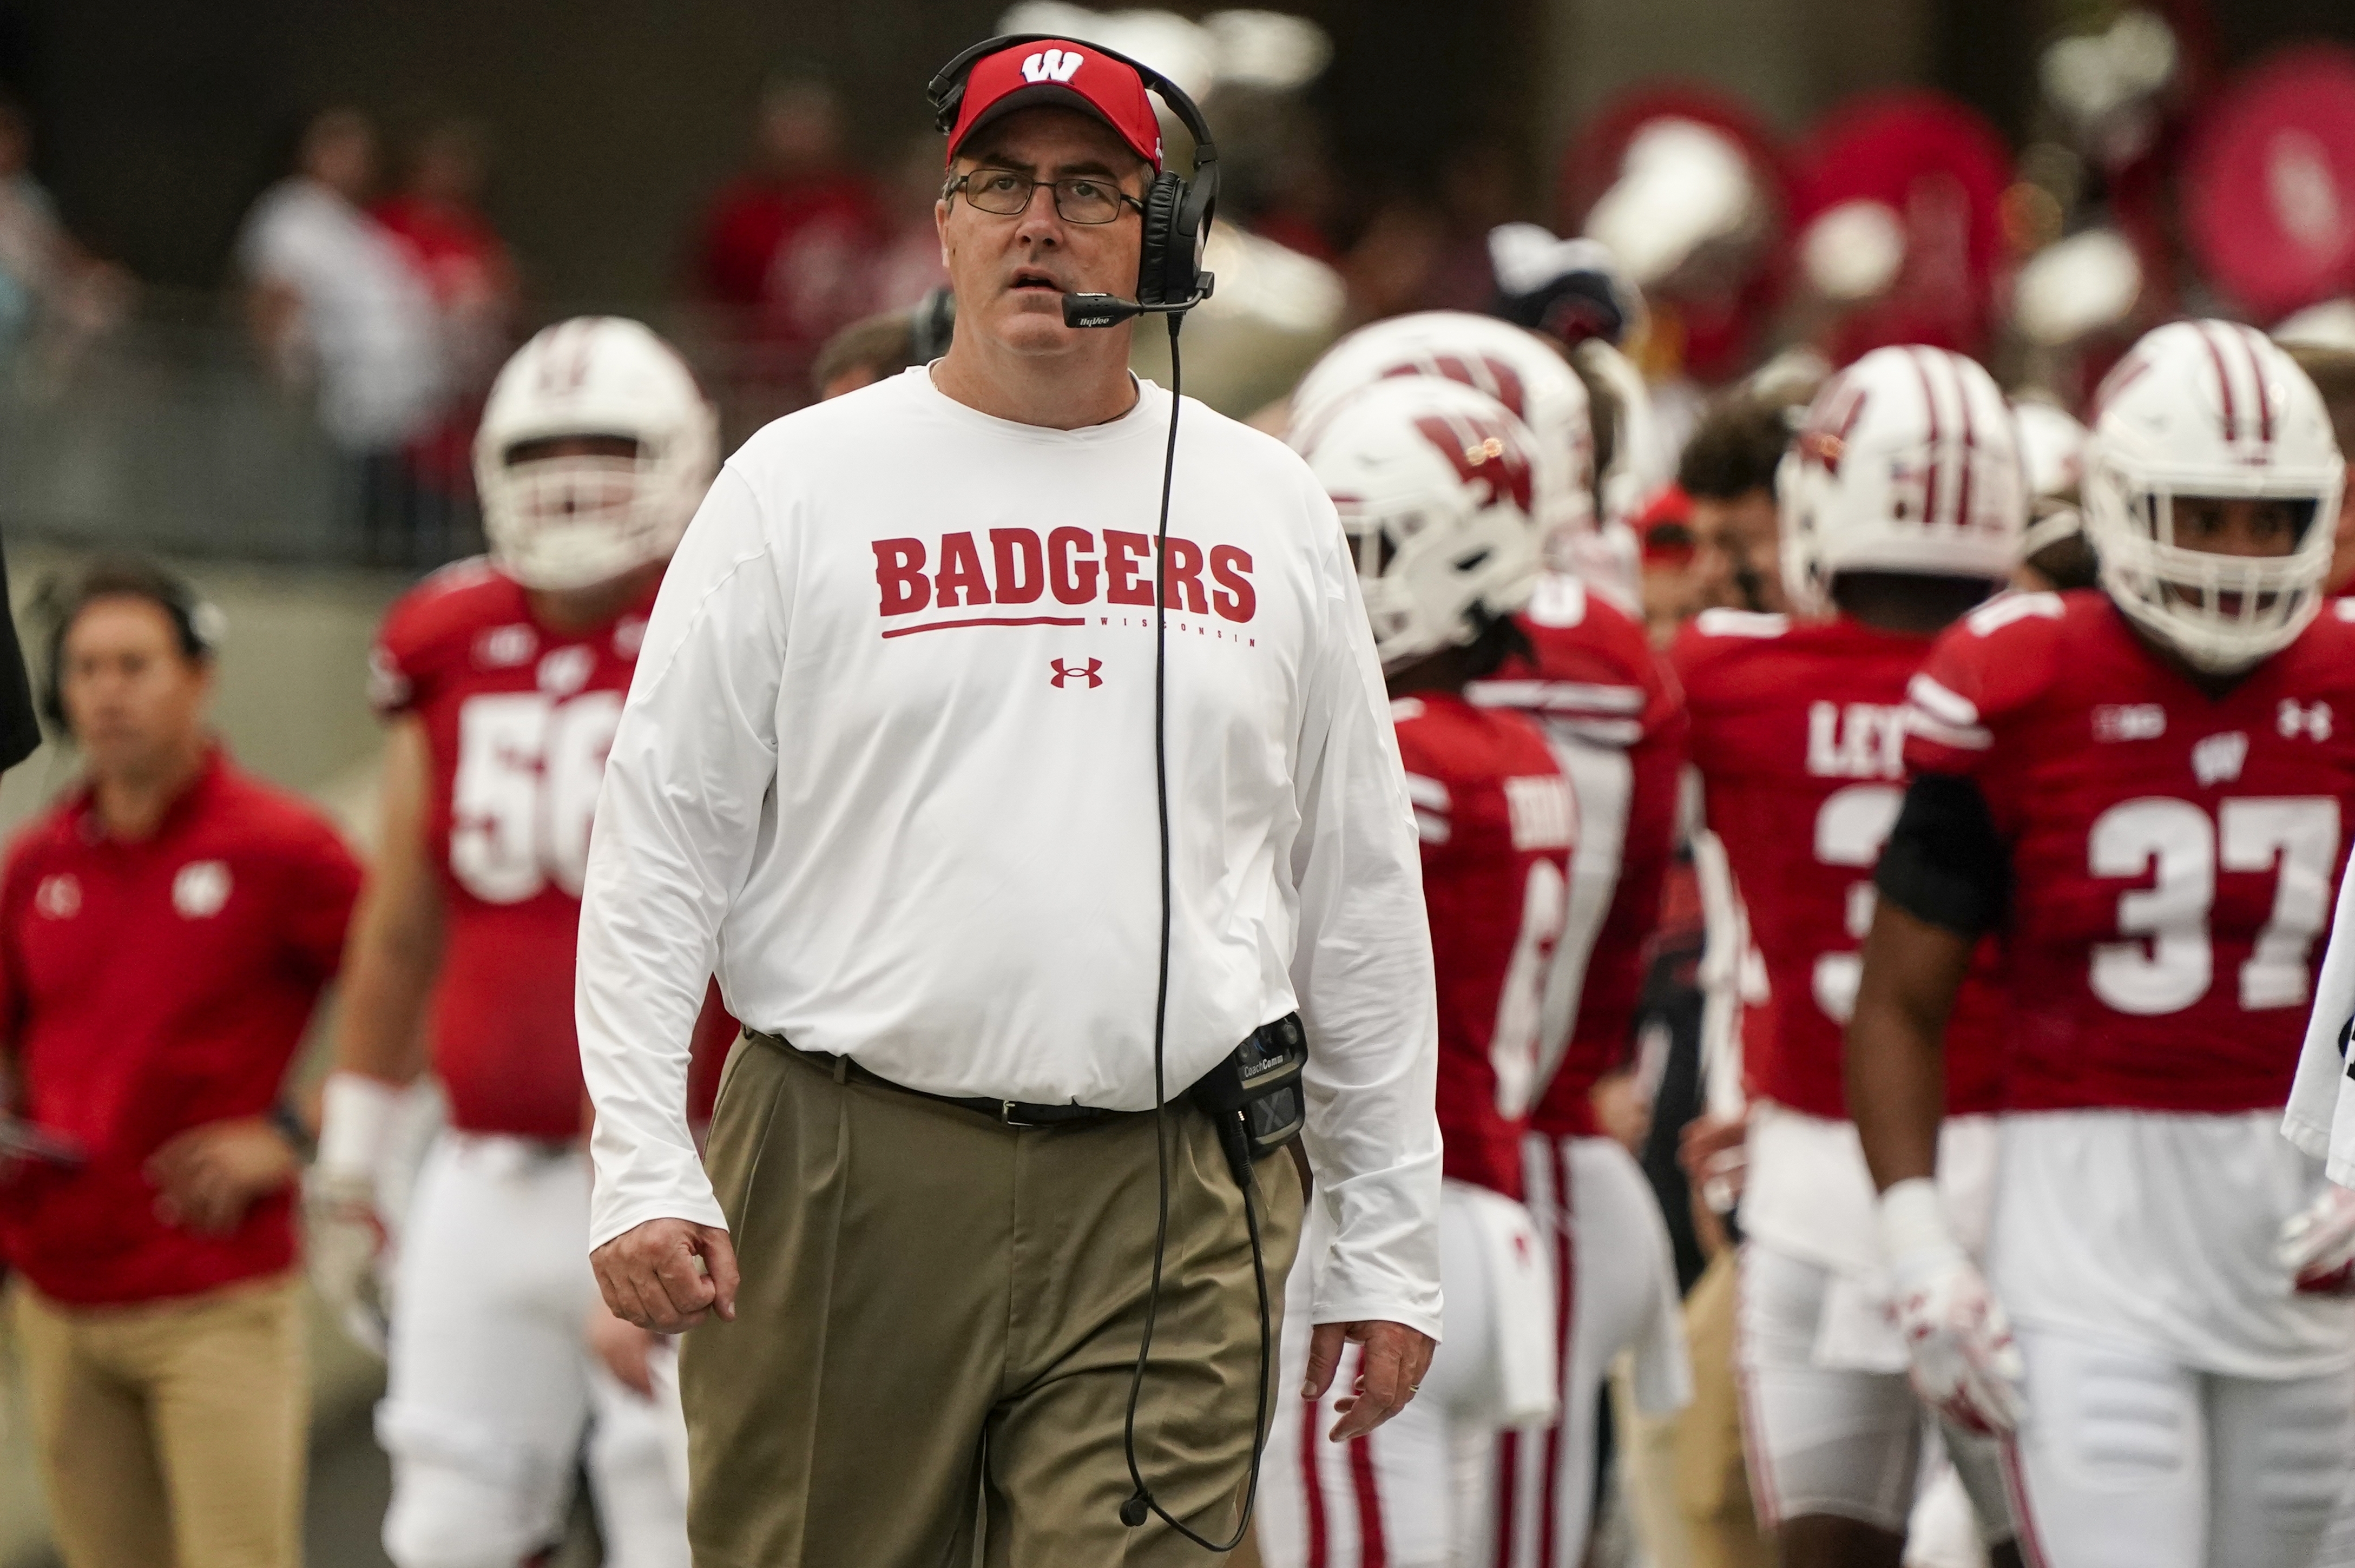 UW: Chryst out as Badgers head coach, Jim Leonhard will take over